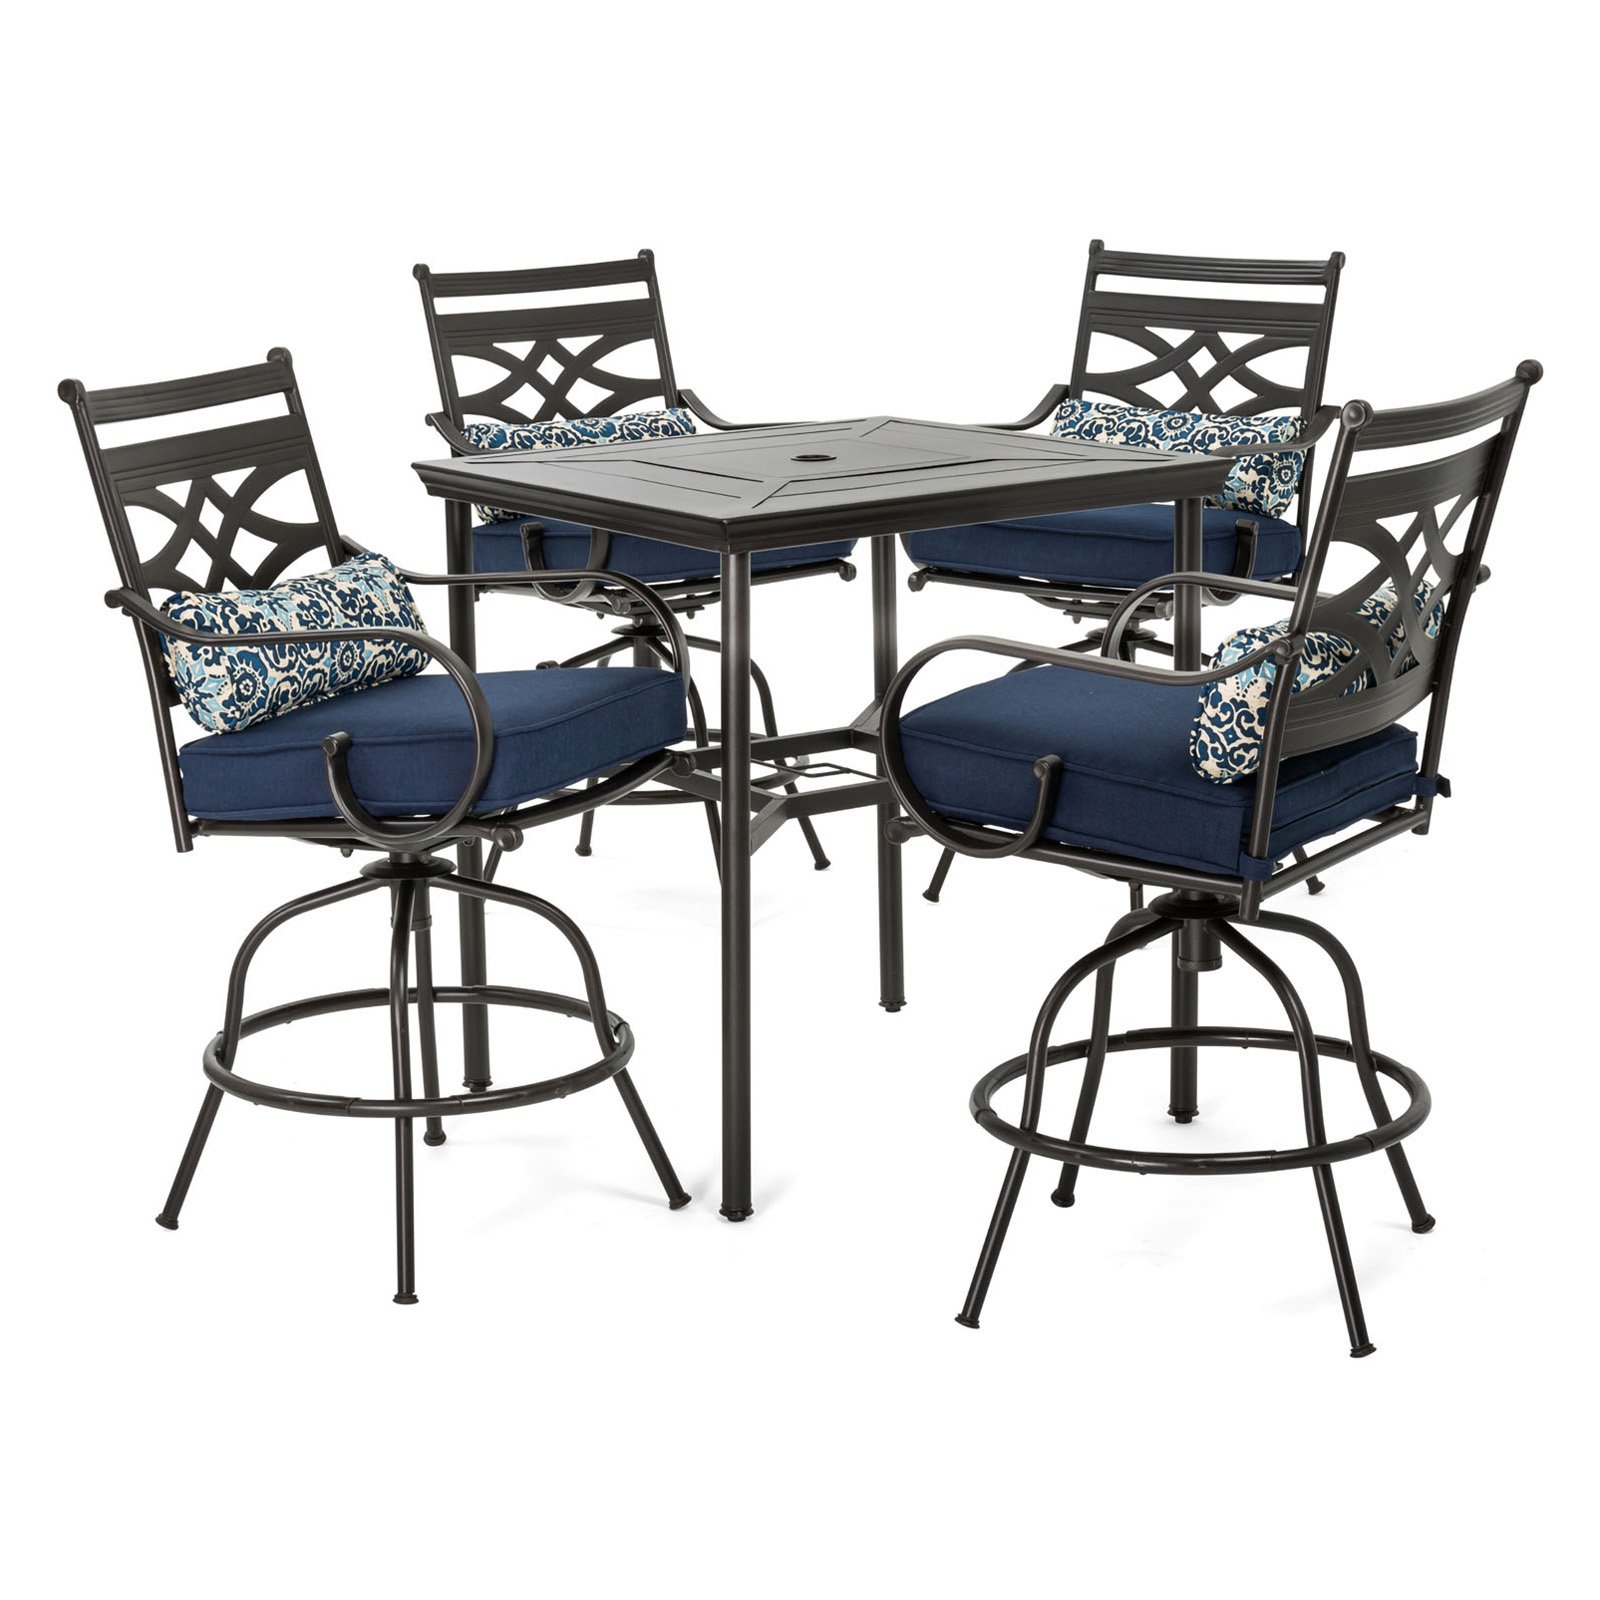 Hanover Montclair 5-Piece Steel Outdoor Counter-Height Dining Set with Chairs and Table, Seats 4 - image 1 of 12